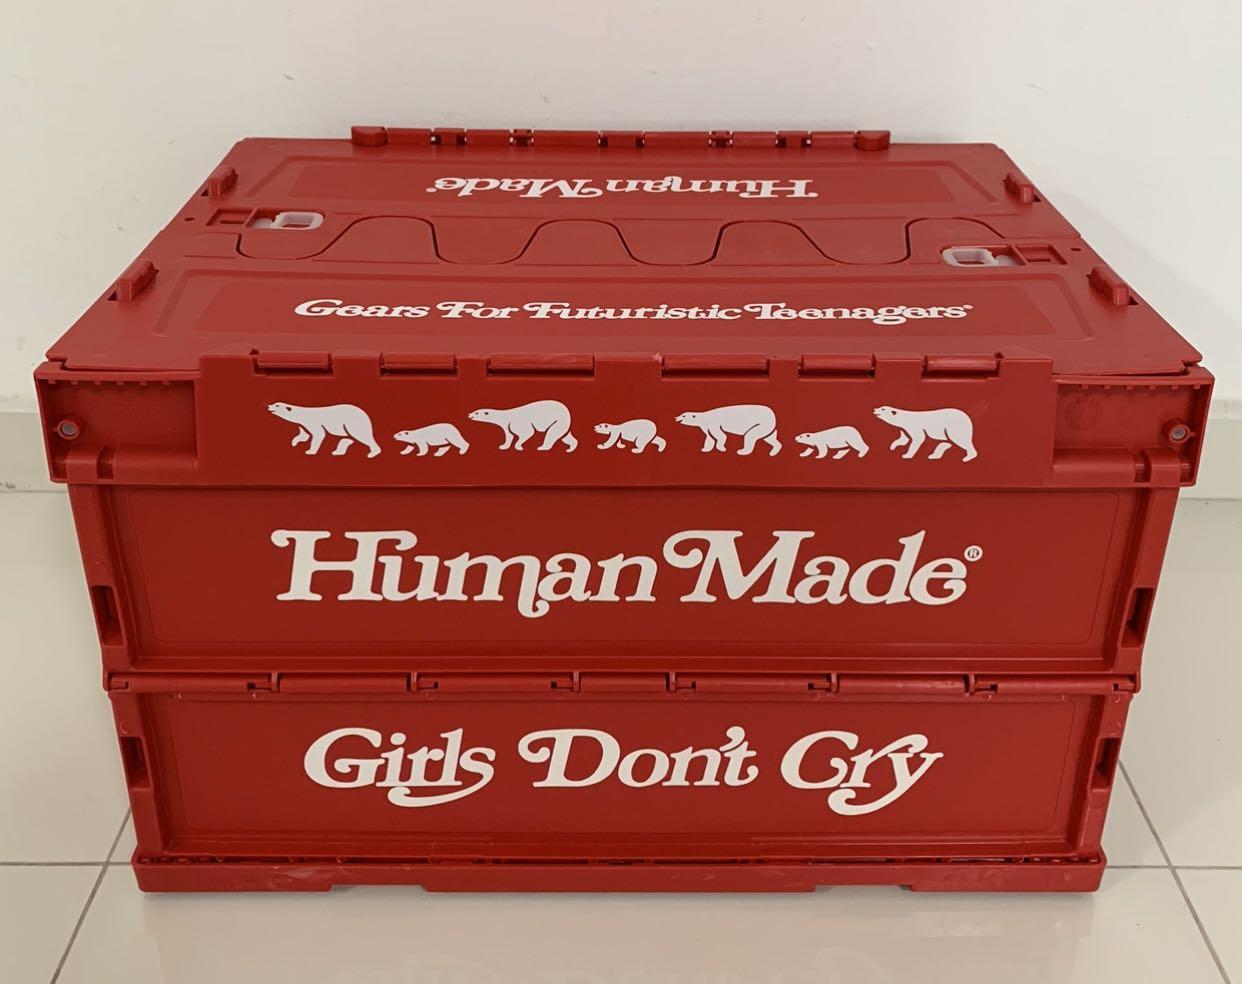 Human made x Girls don't cry 50L container/crate, Furniture & Home